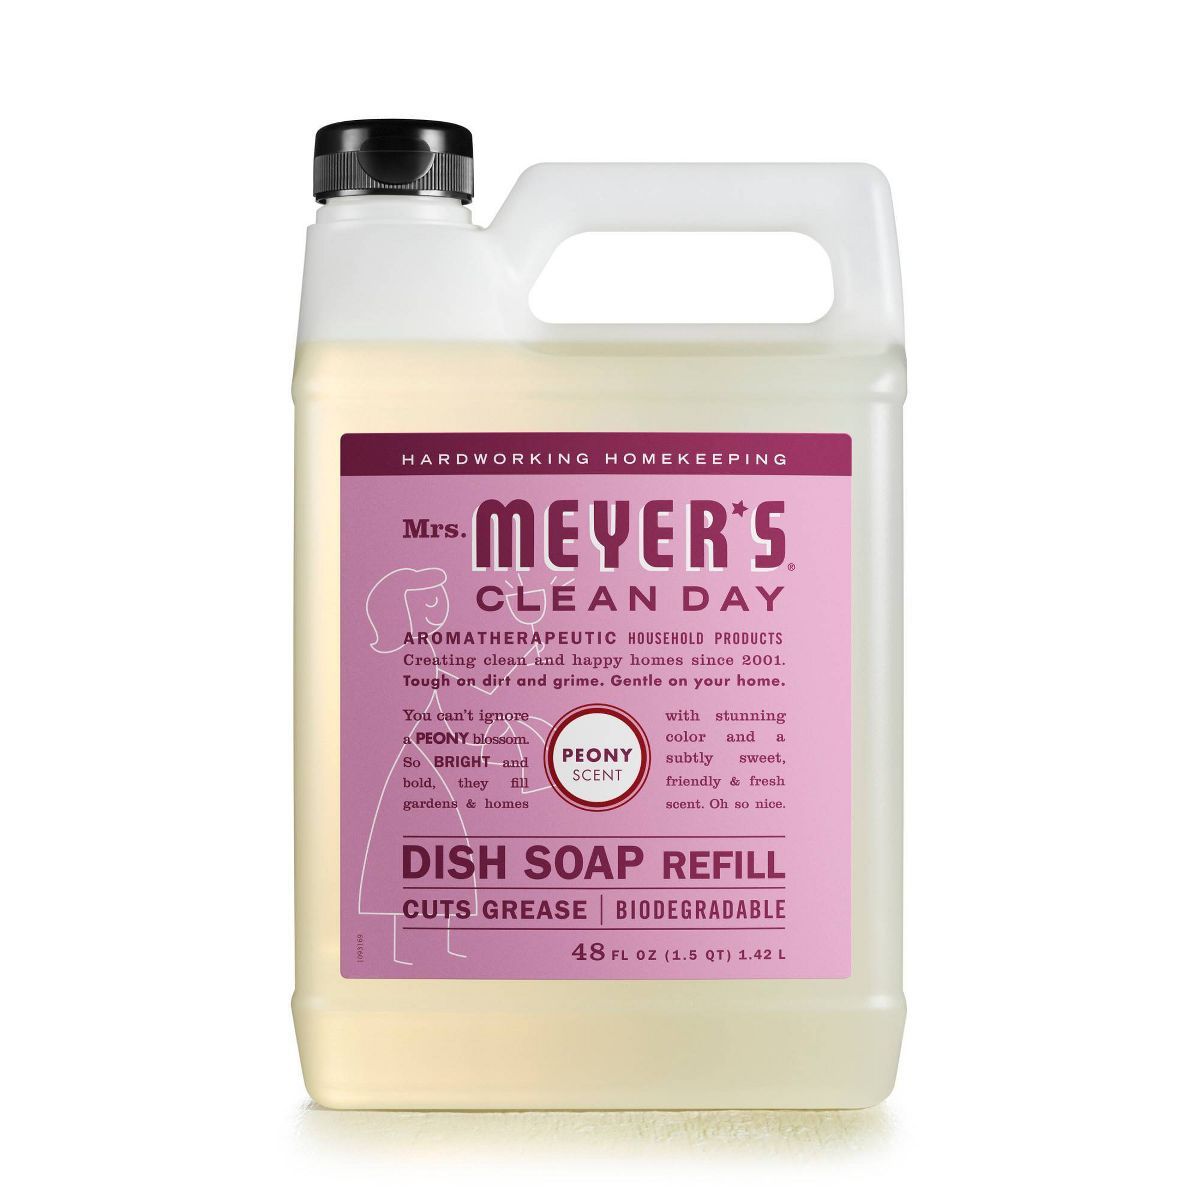 Mrs. Meyer's Clean Day Peony Dish Soap Refill - 48 fl oz | Target